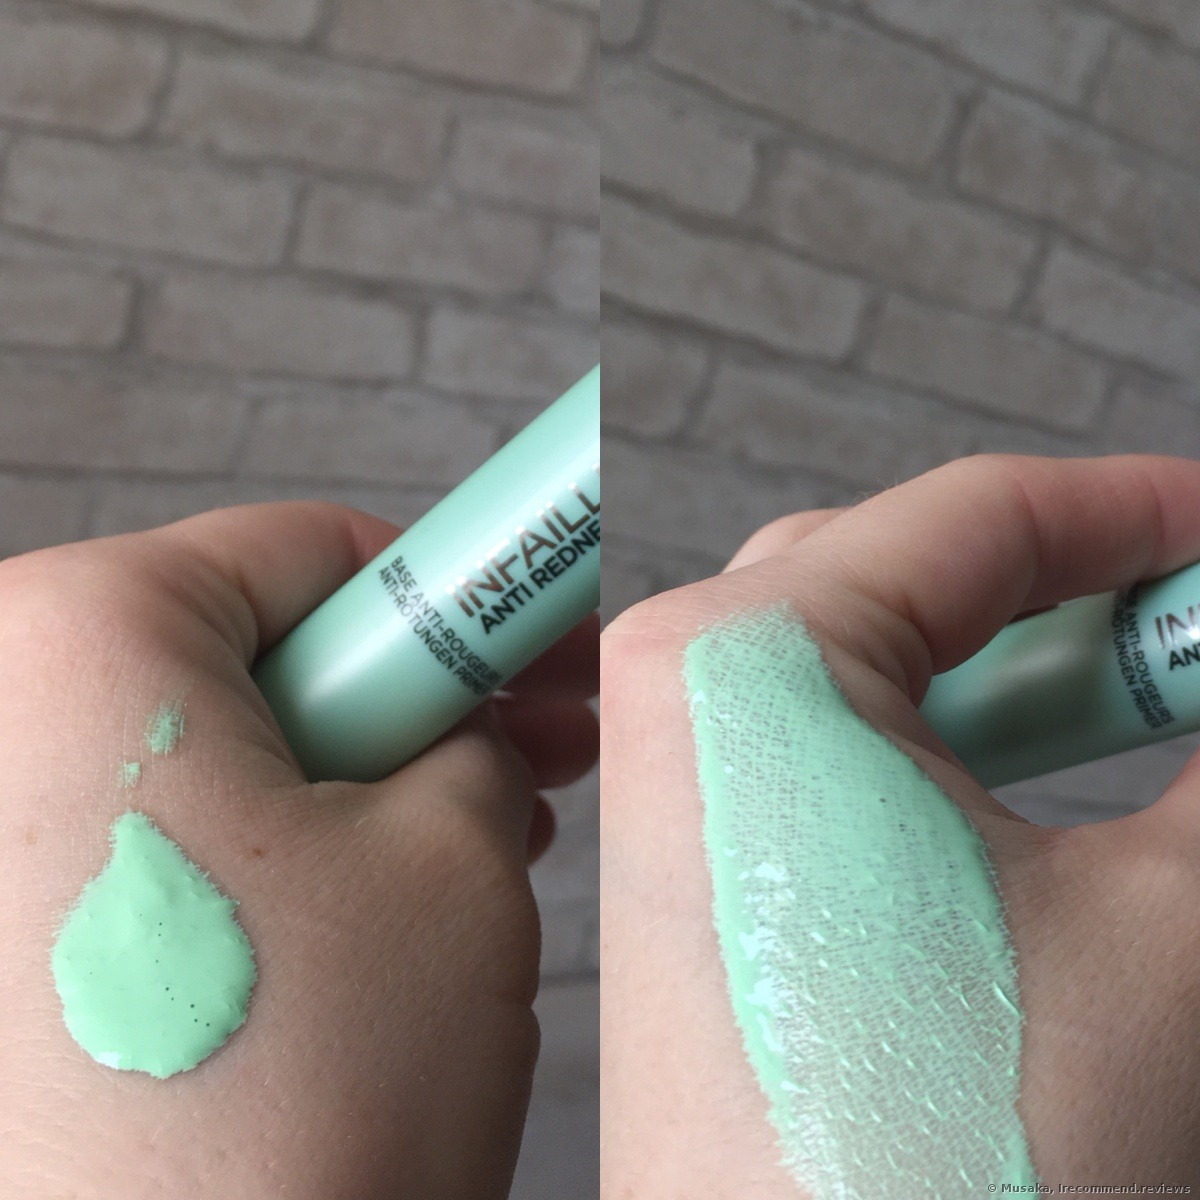 L'Oreal Primer - «L'Oreal Anti-Redness Primer. Before and after. Does really neutralize redness?» | Consumer reviews